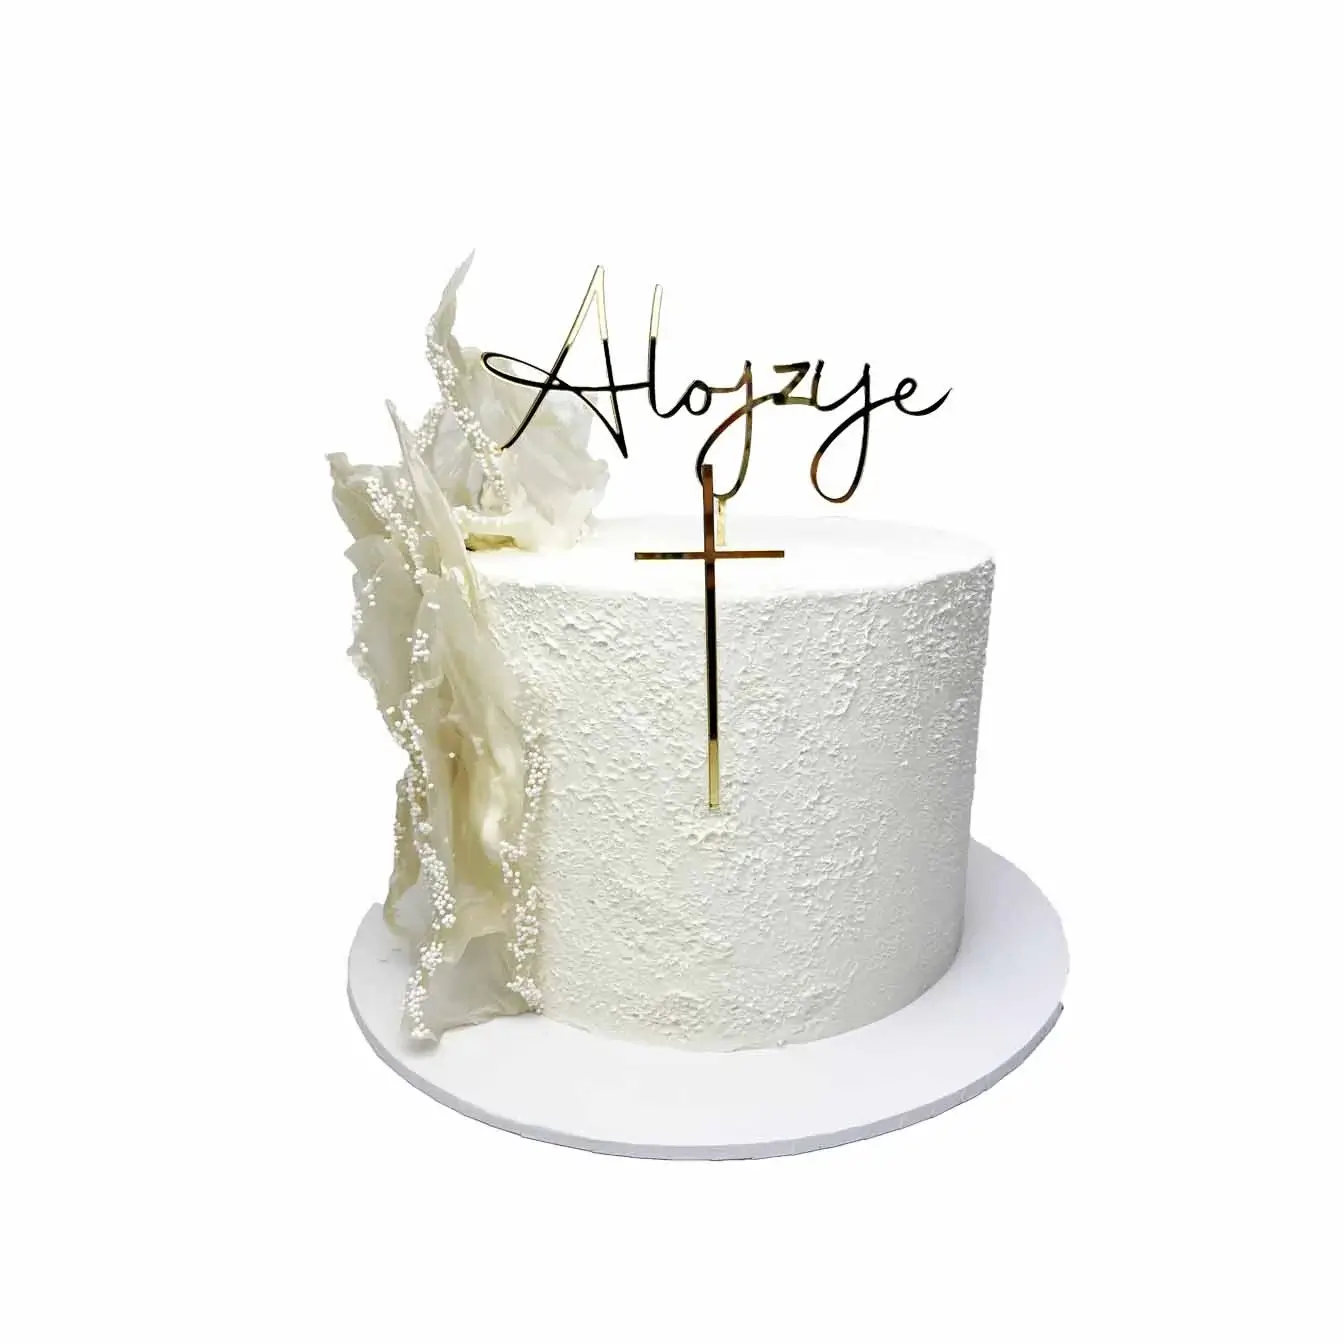 Pure Blessings Baptism Cake - A white textured cake with rice paper sails, a custom cross, and a personalized topper, a divine centerpiece for baptism celebrations and spiritual milestones.